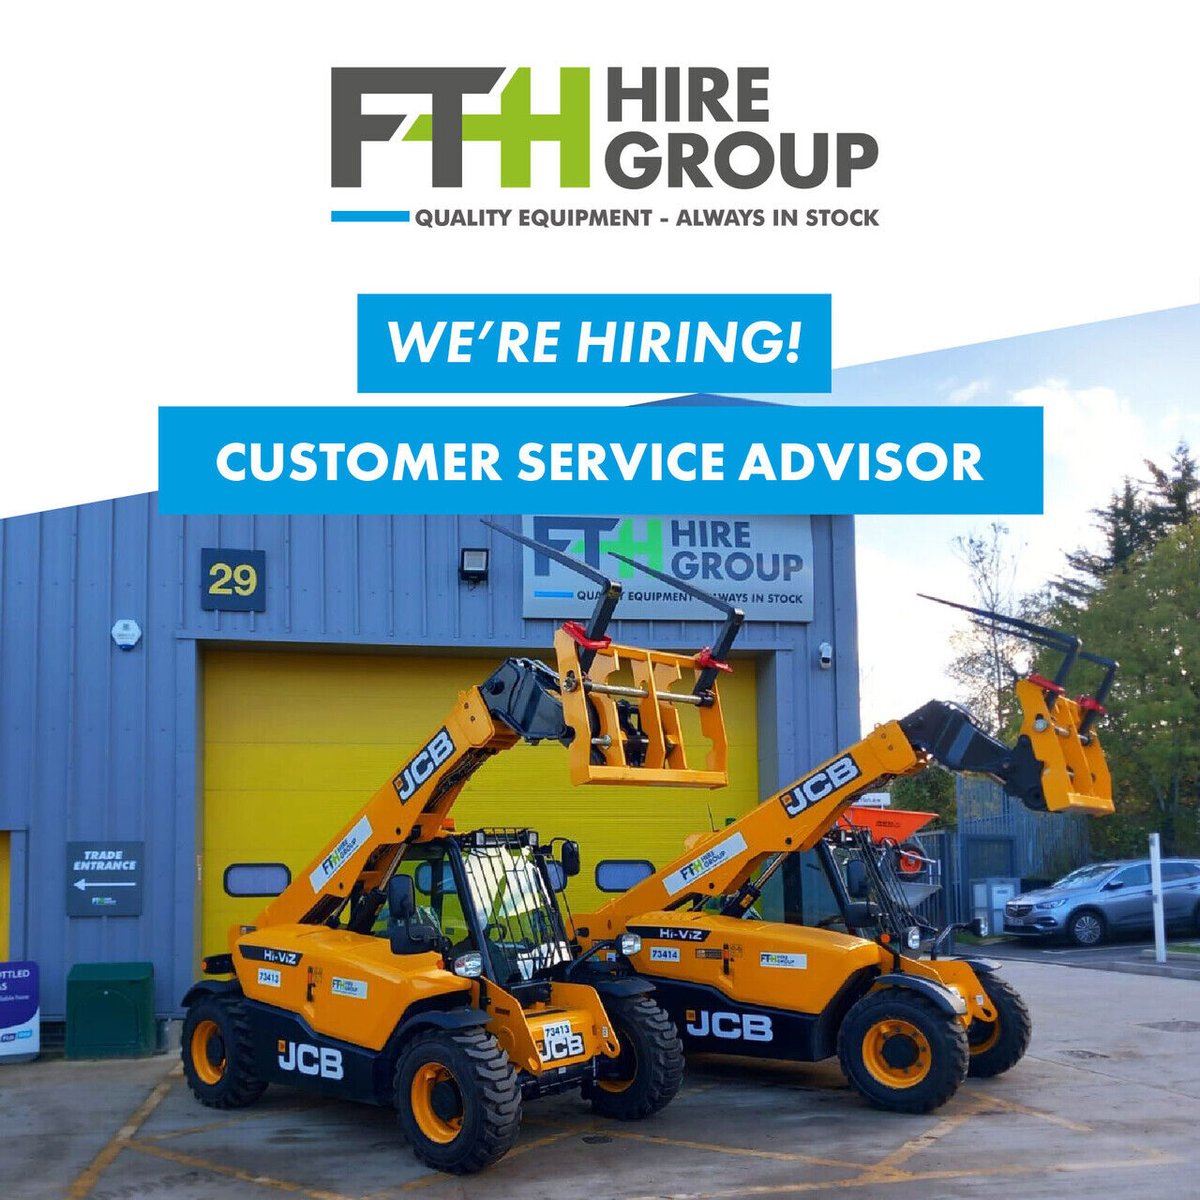 We are recruiting for a Customer Service Advisor role at our Guildford Hire Hub, to join our growing business. 

Please apply to:
✉️ hr@fthhiregroup.co.uk

#guildford #guildfordjobs #guildfordrecruitment #jobs #jobsguildford